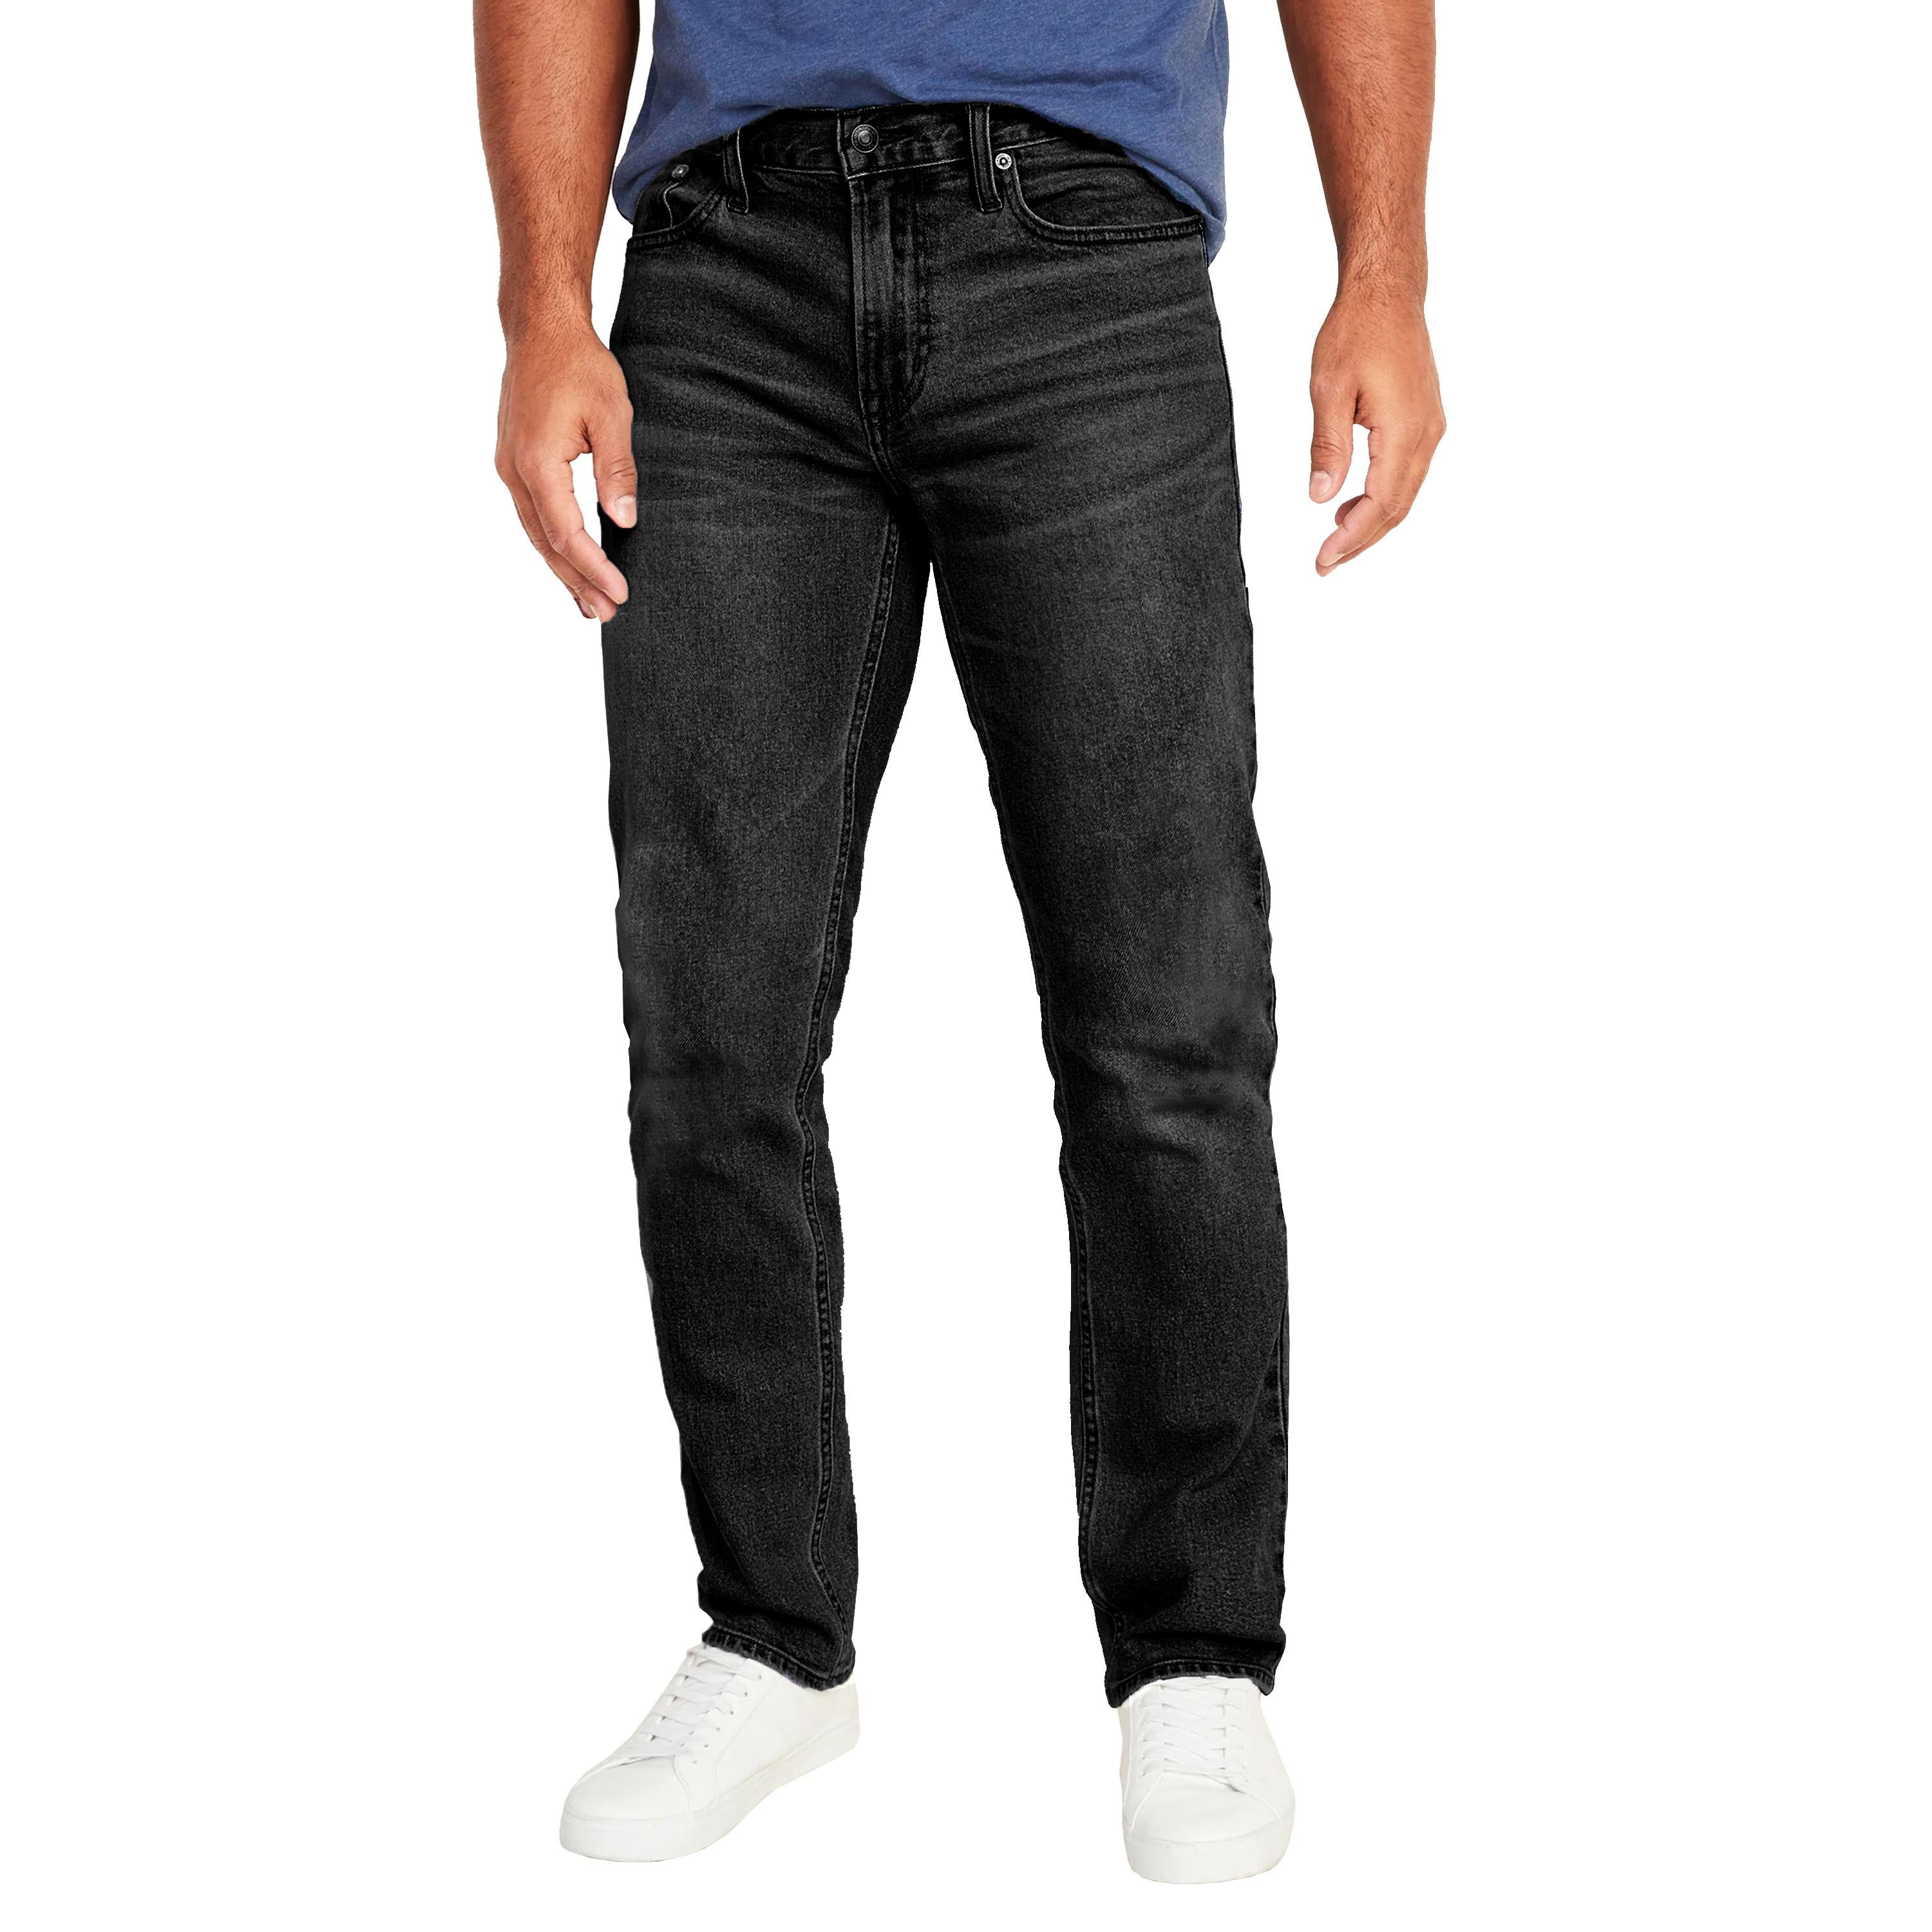 Galaxy By Harvic Men's 5-pocket Ultra-stretch Skinny Fit Chino